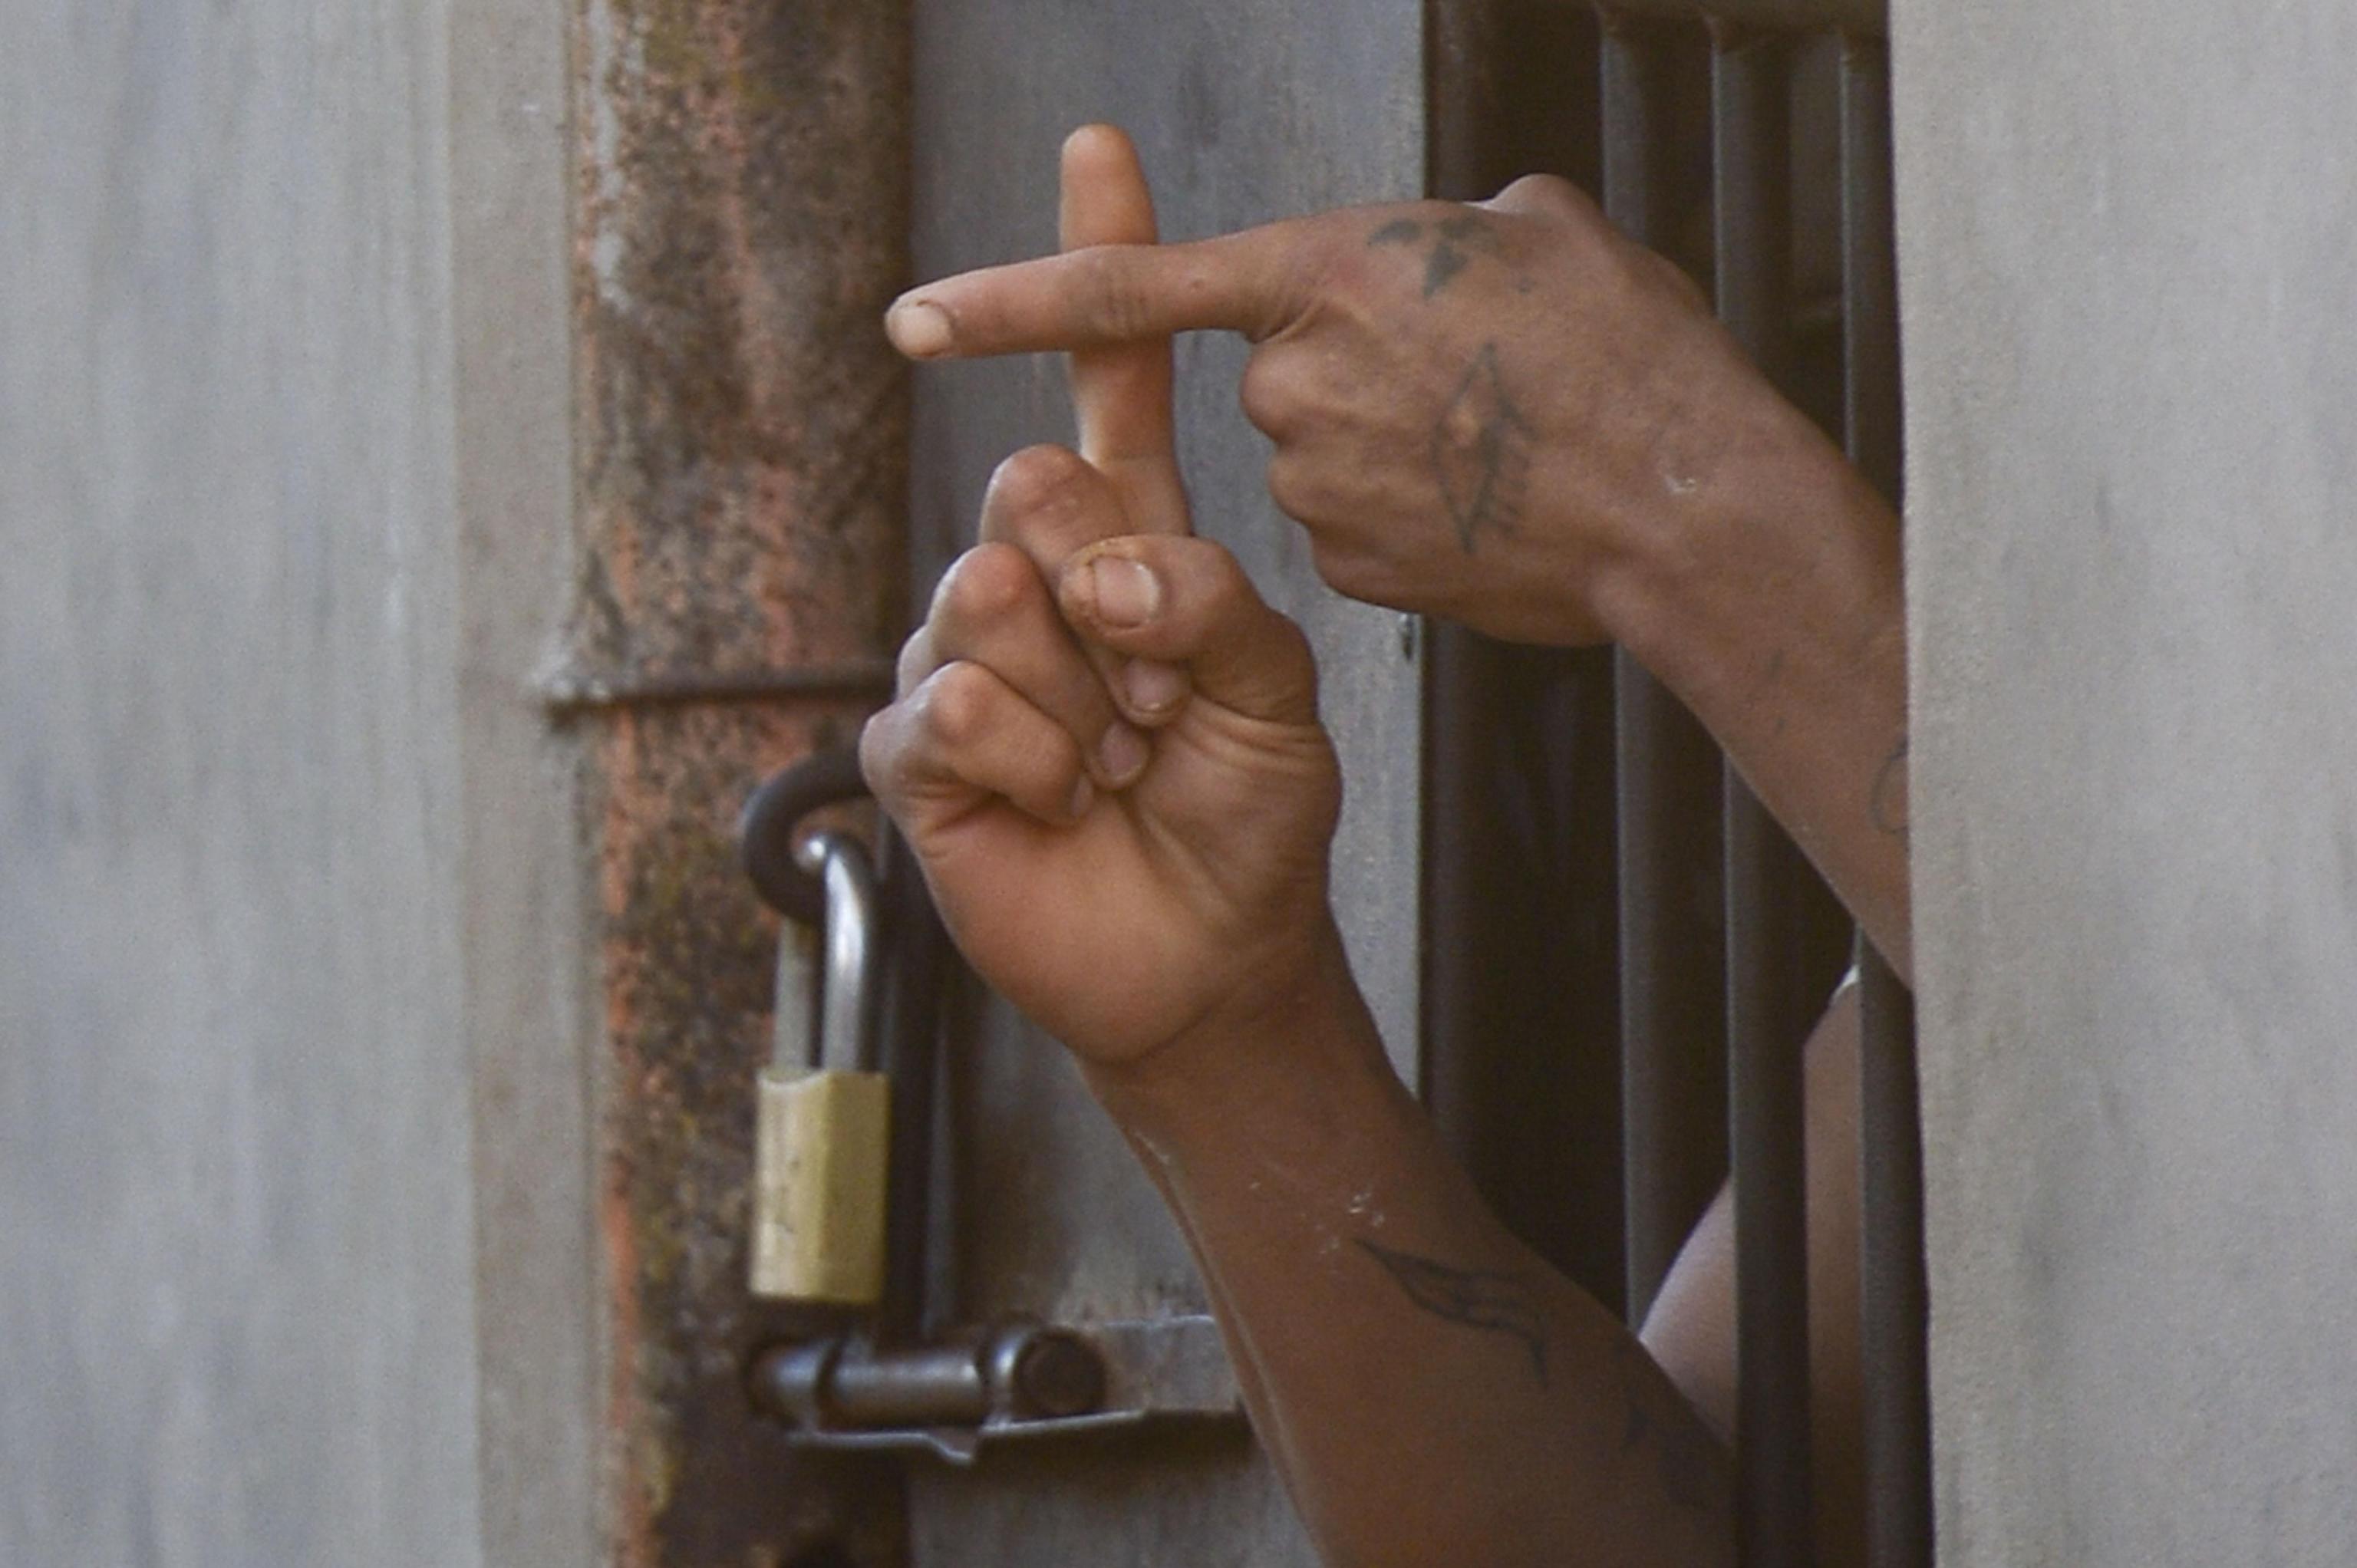 Inmate of the Reform Center of Santa Cruz-Palmasola forms the sign of the cross with his fingers